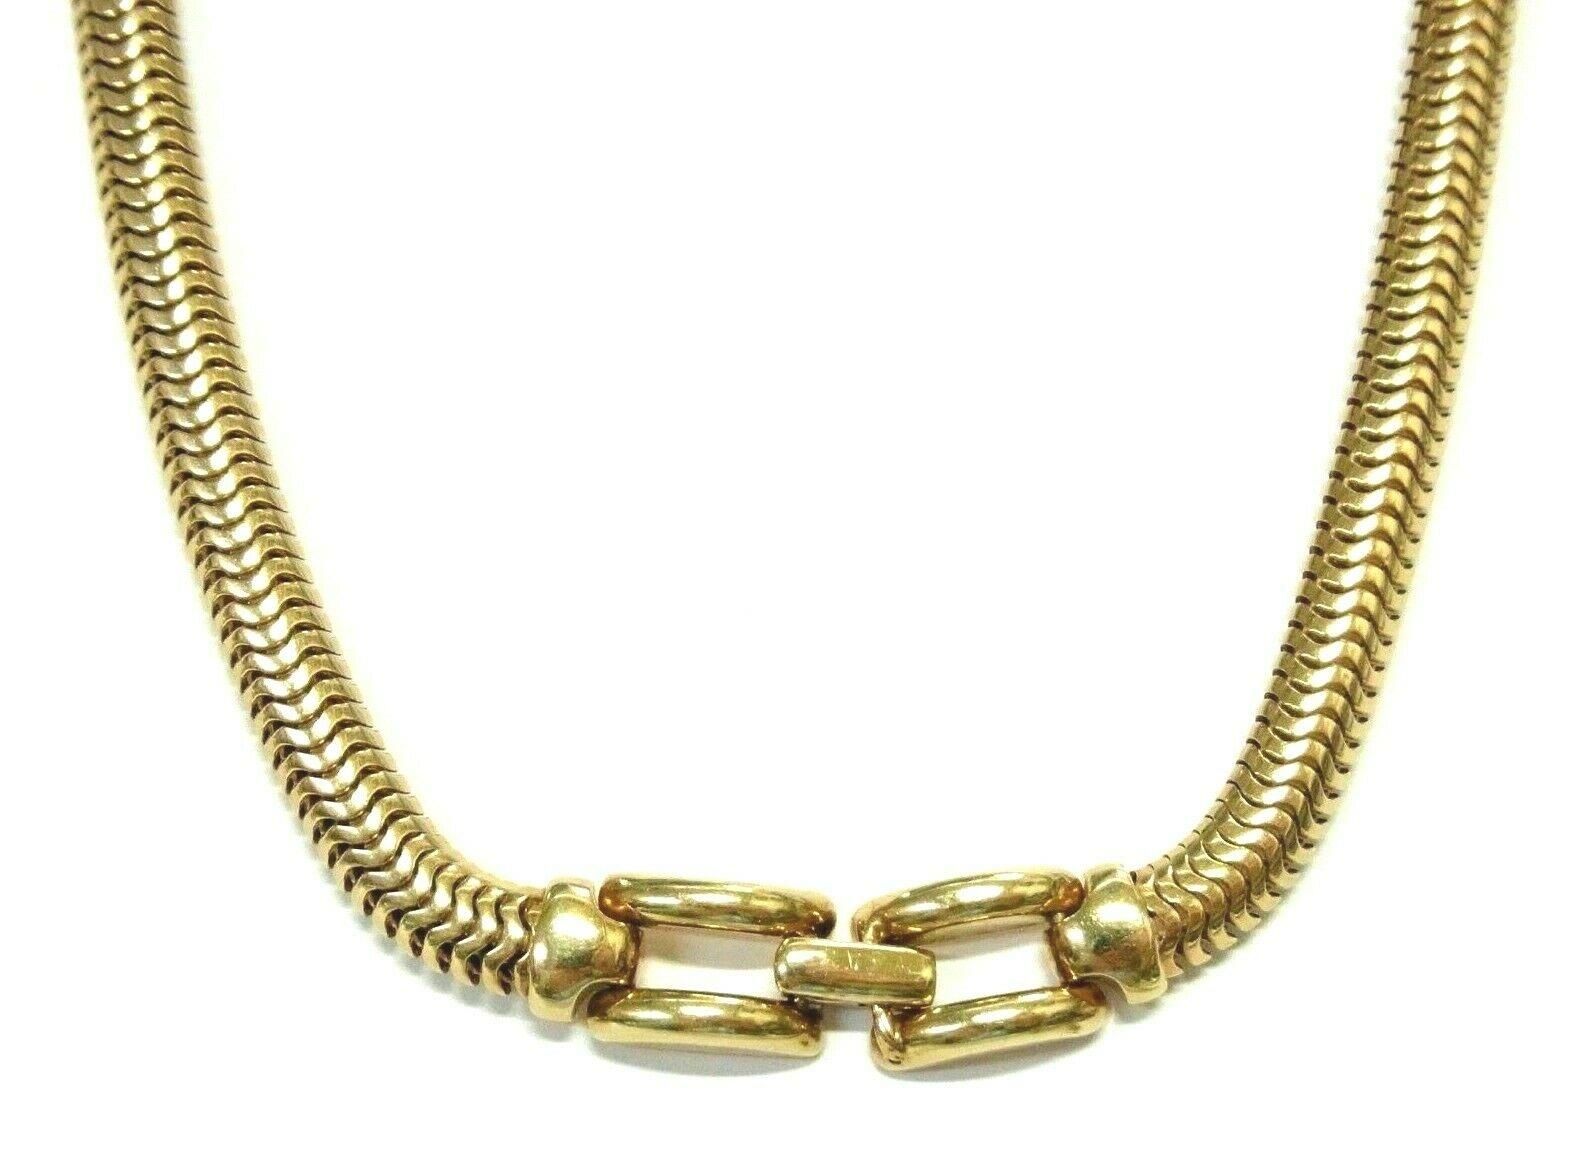 Tiffany & Co. Retro 14k Yellow Gold Snake Chain Necklace Circa 1940s





Here is your chance to purchase a beautiful and highly collectible designer necklace.  Truly a great piece at a great price! 



Weight: 34.8 grams



Condition: